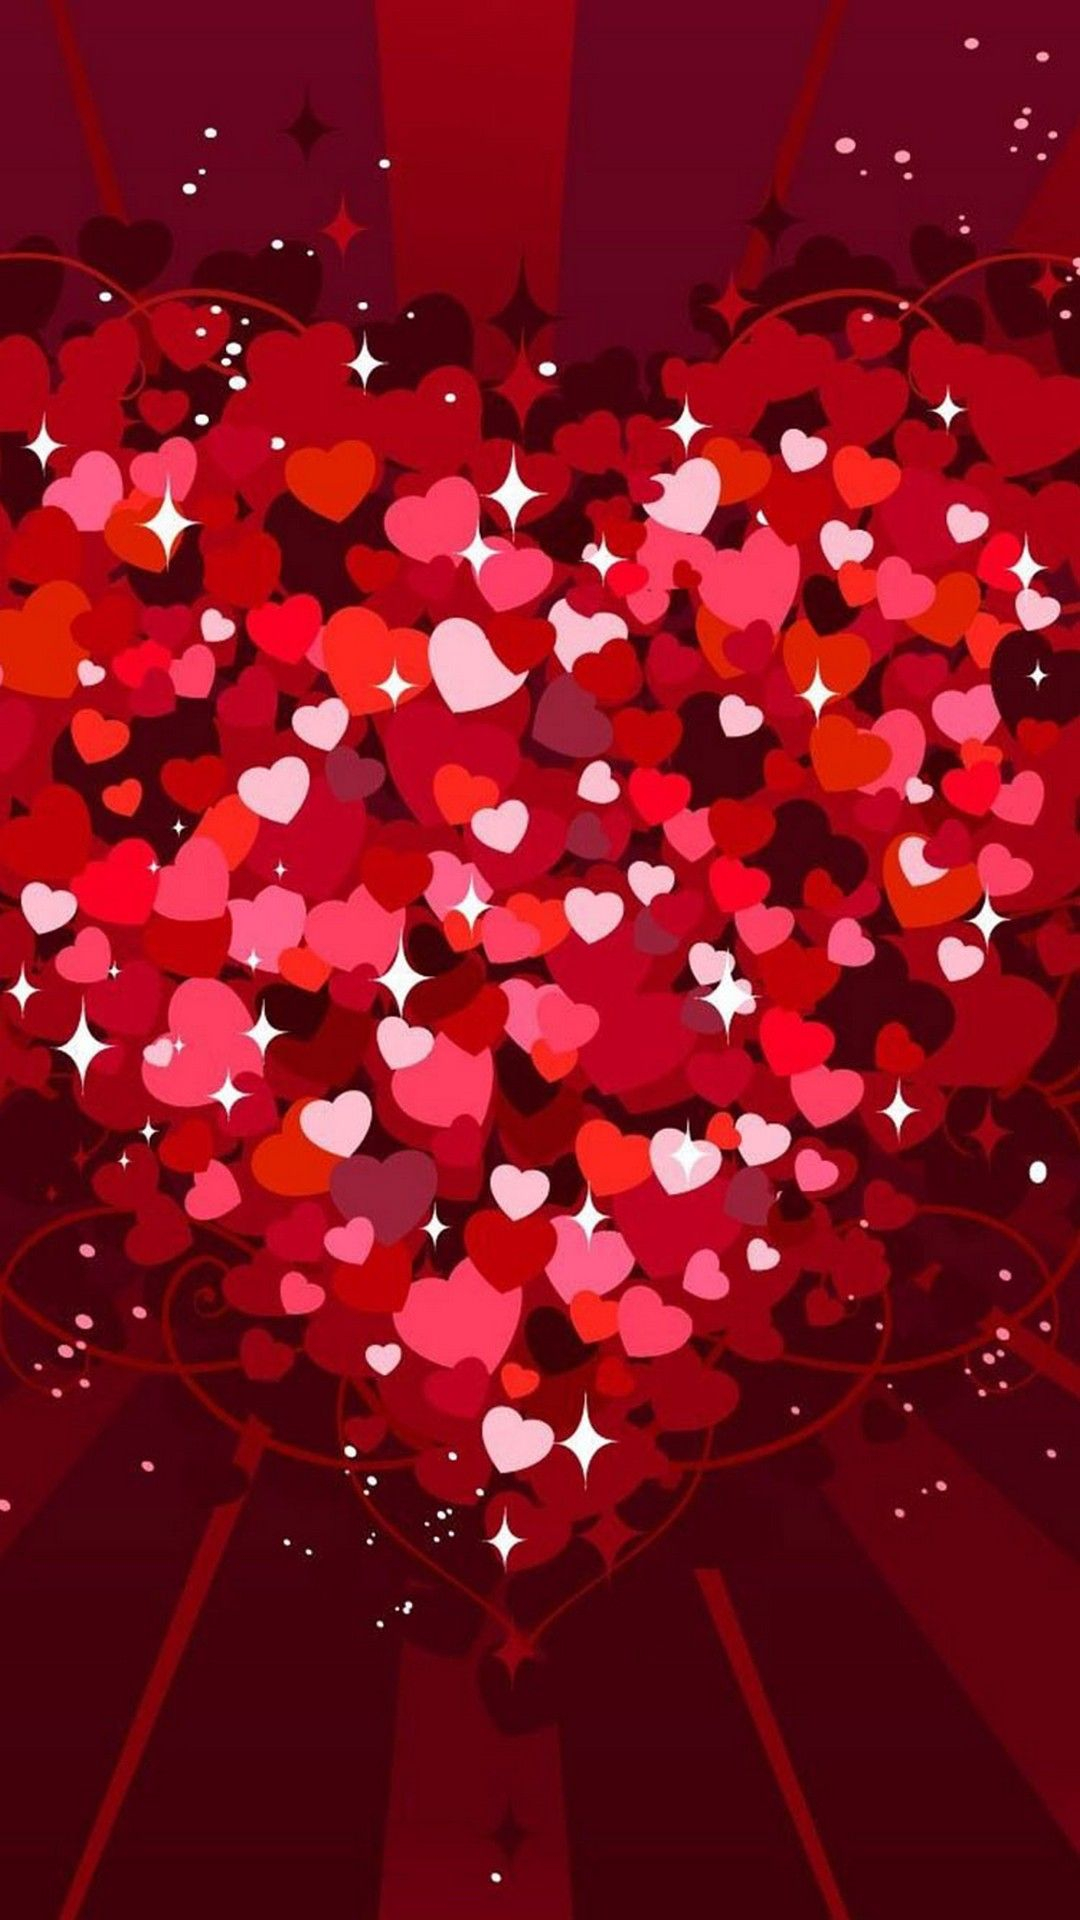 1080x1920 Heart Valentine Day Wallpaper iPhone Live Wallpaper HD | Valentines wallpaper, Free valentine wallpaper, Iphone wallpaper 10